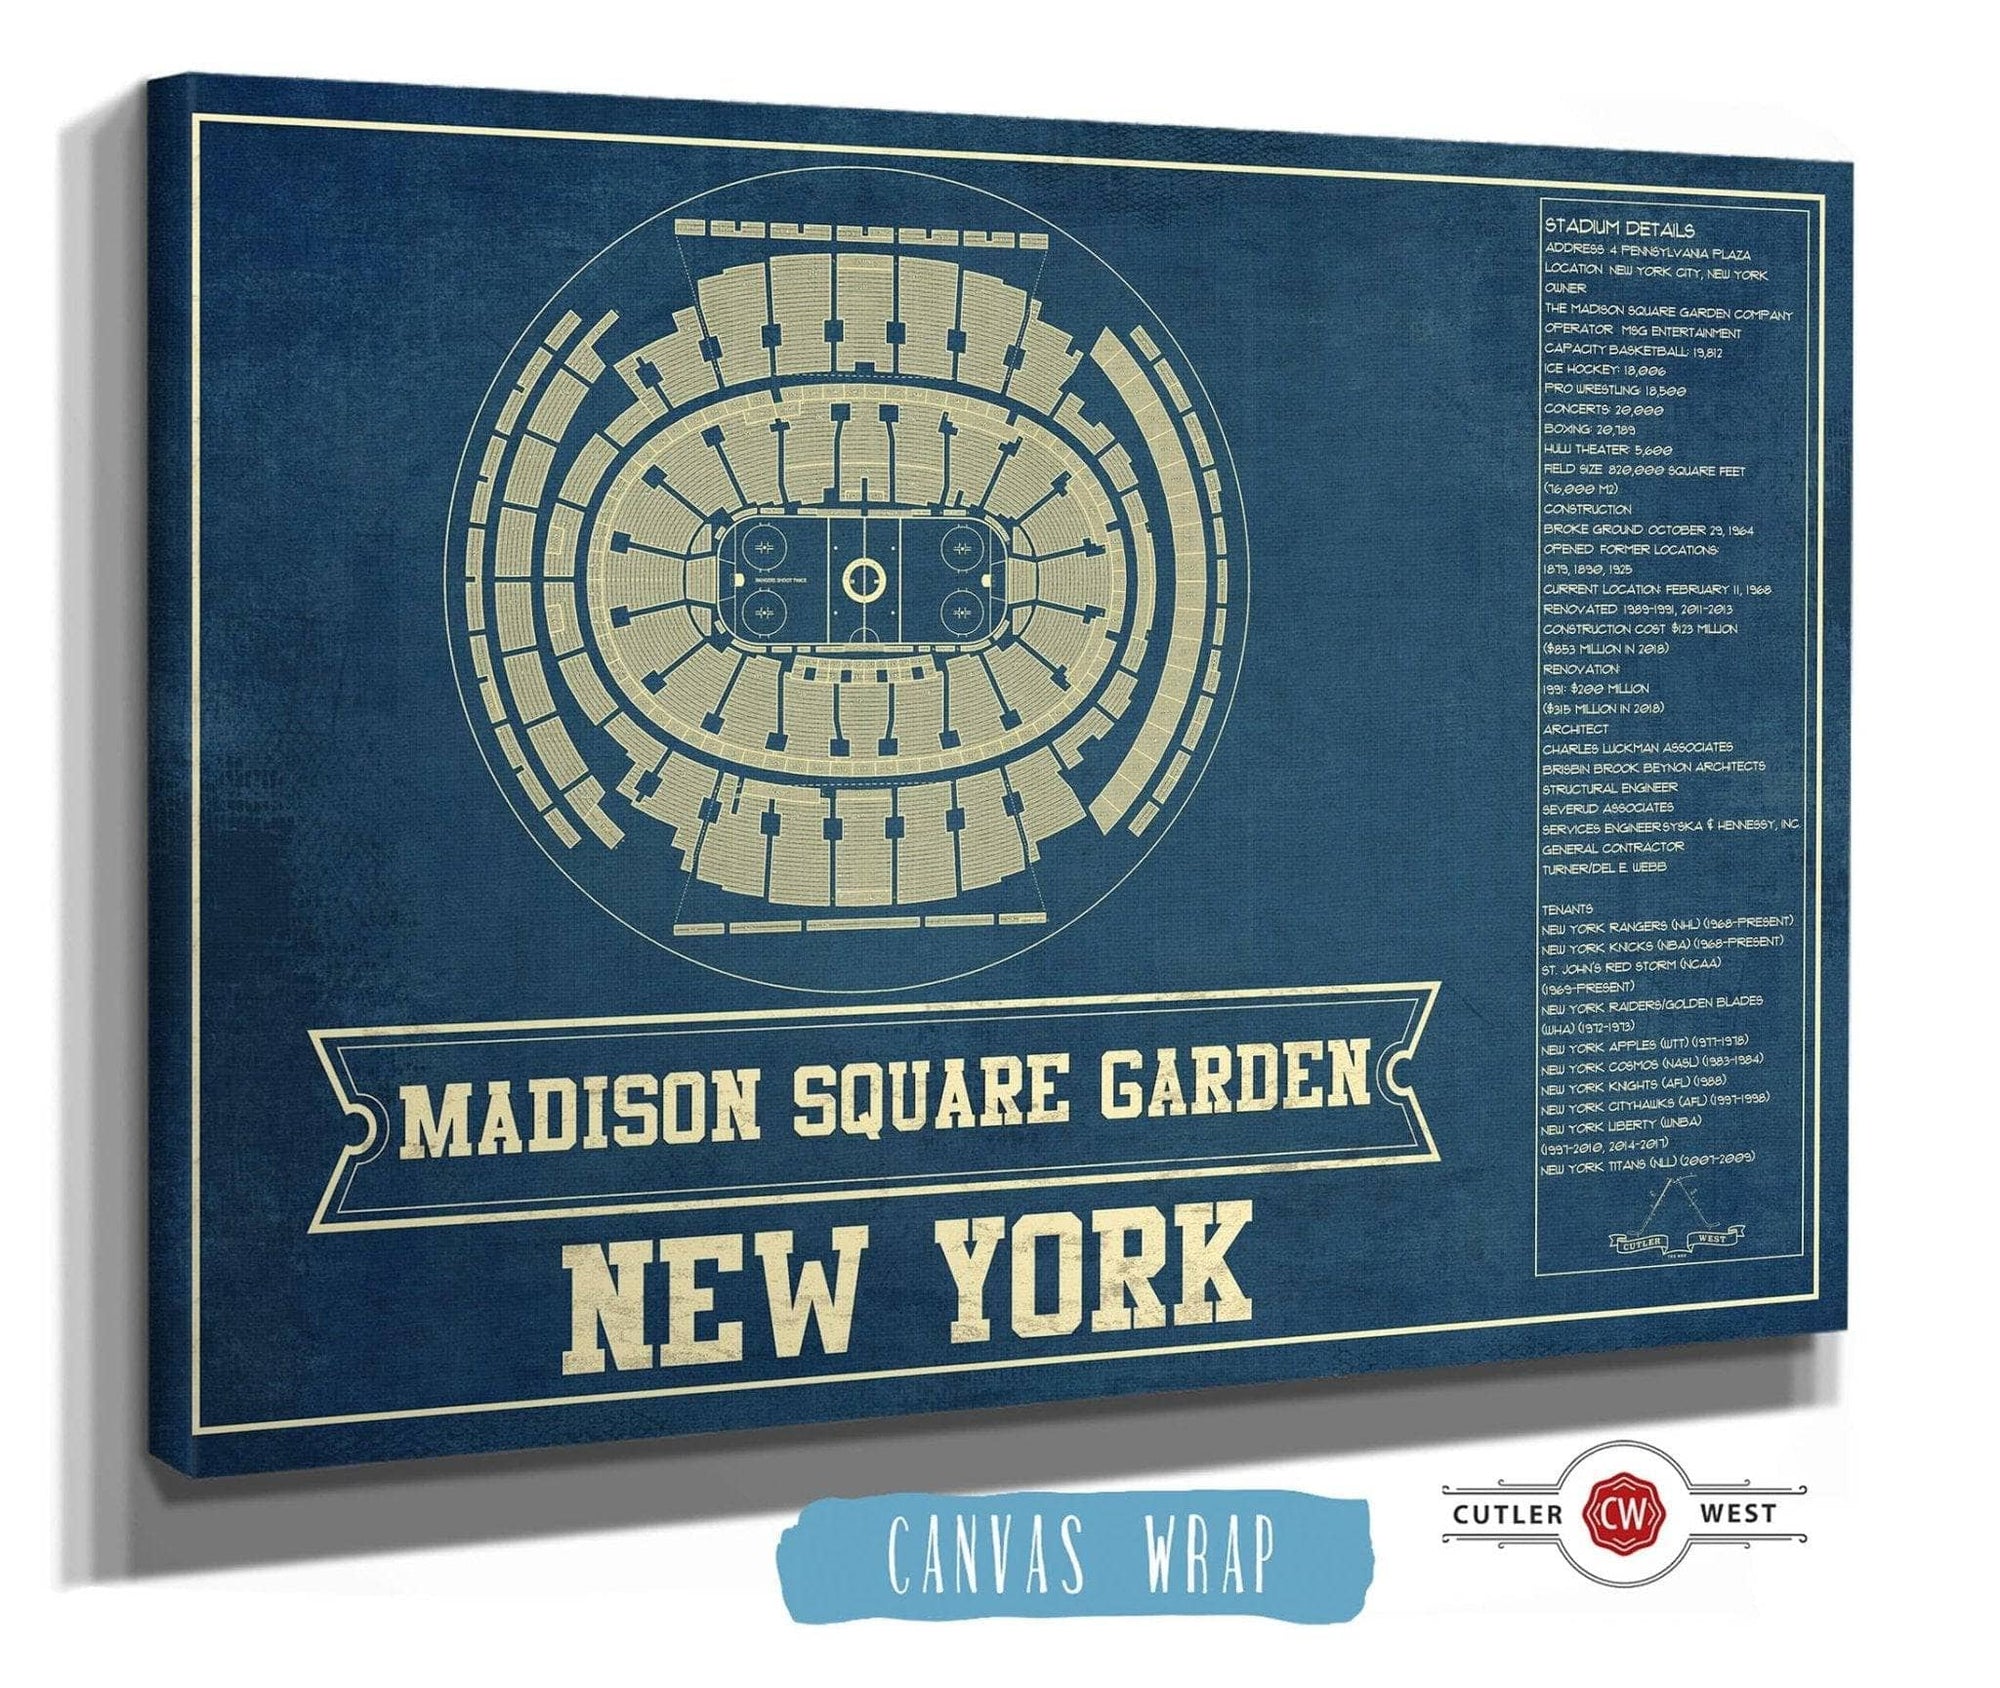 Cutler West 14" x 11" / Stretched Canvas Wrap New York Rangers Madison Square Garden Seating Chart - Vintage Hockey Print 662058335-TOP